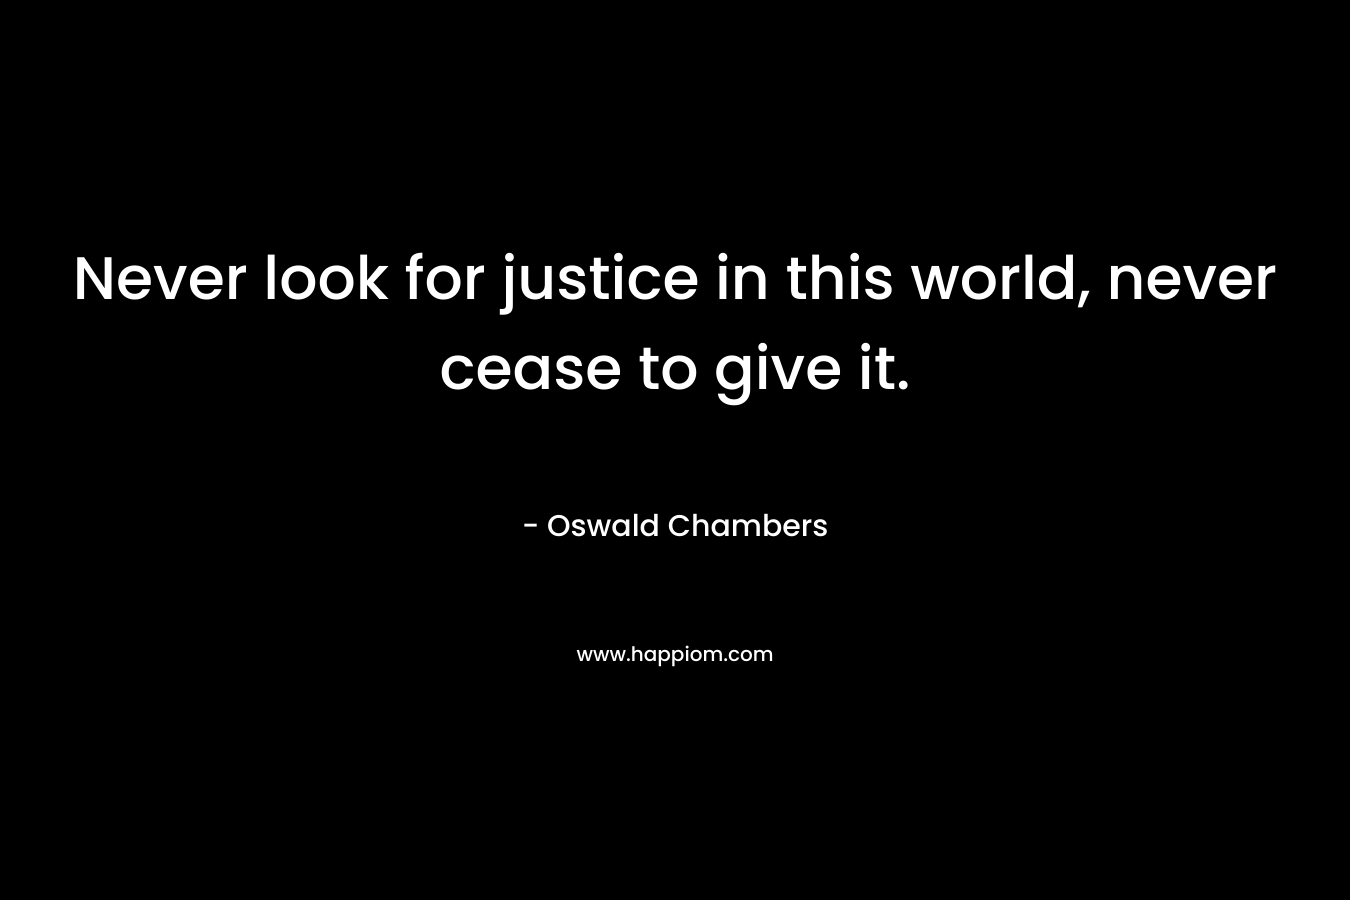 Never look for justice in this world, never cease to give it.